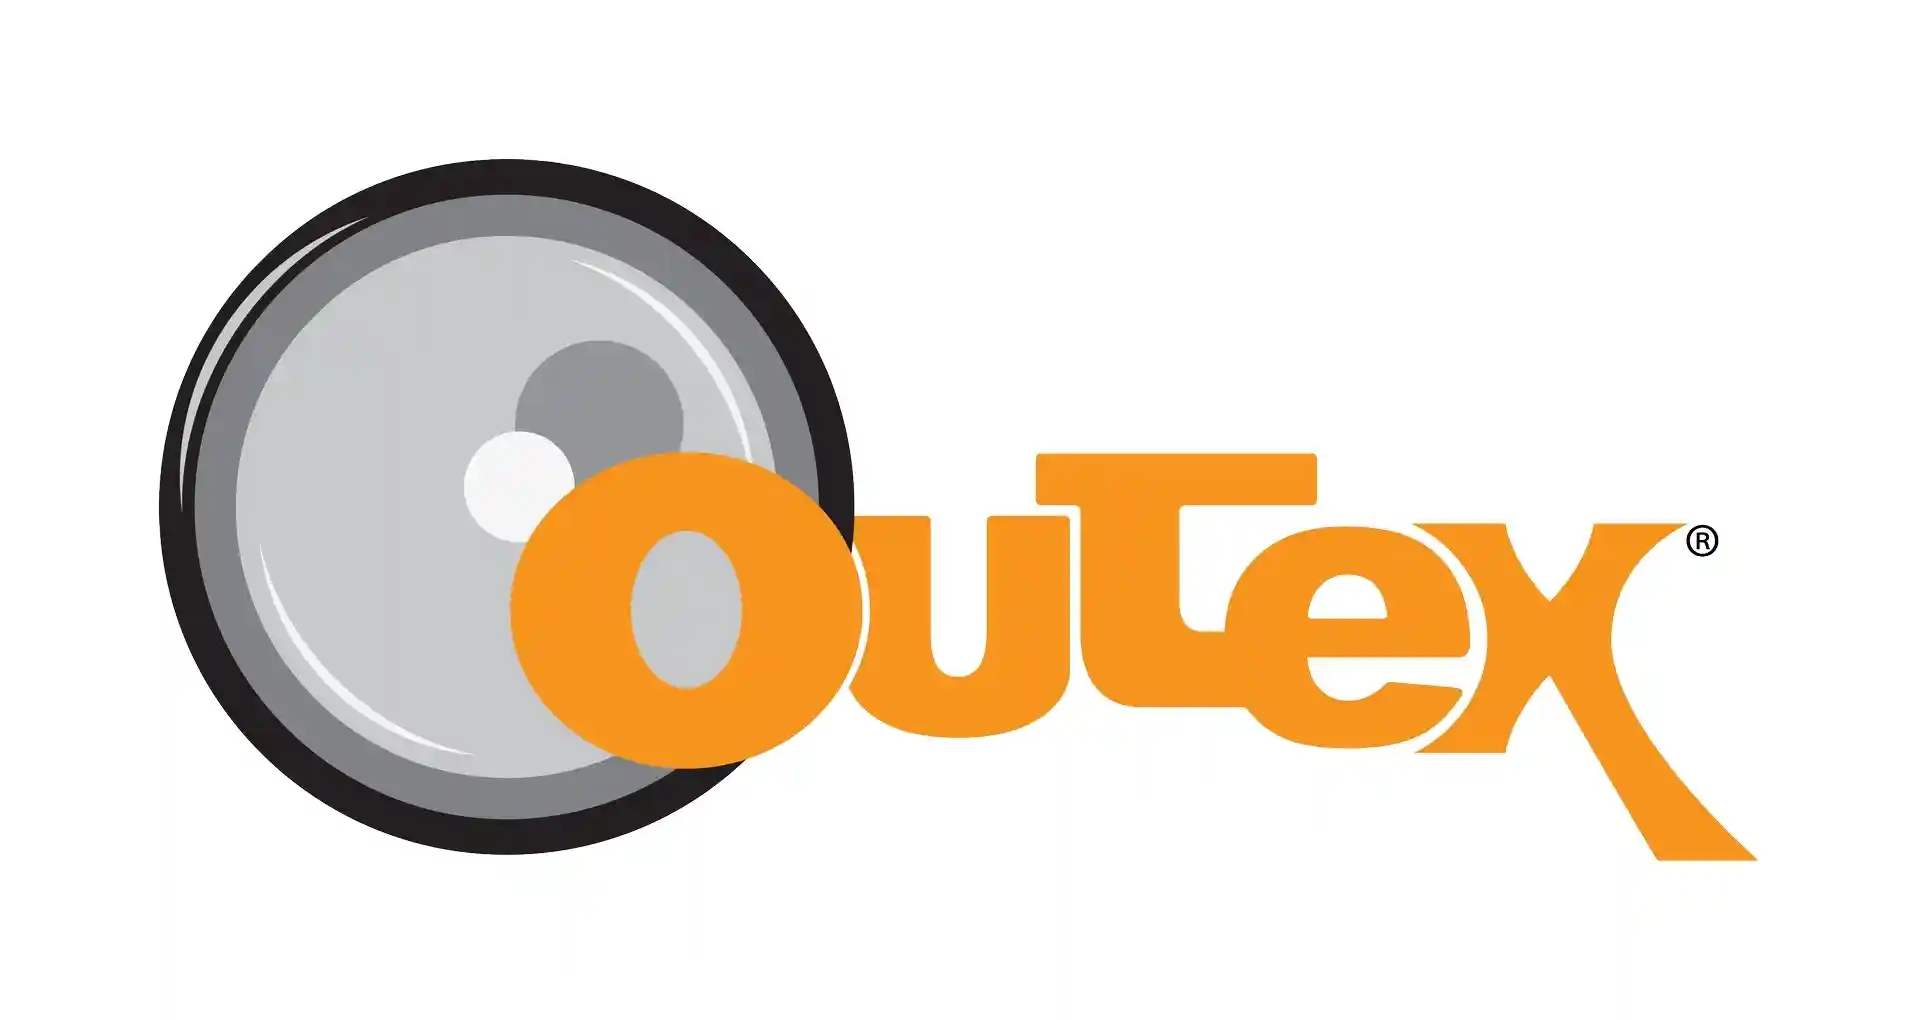 Outex